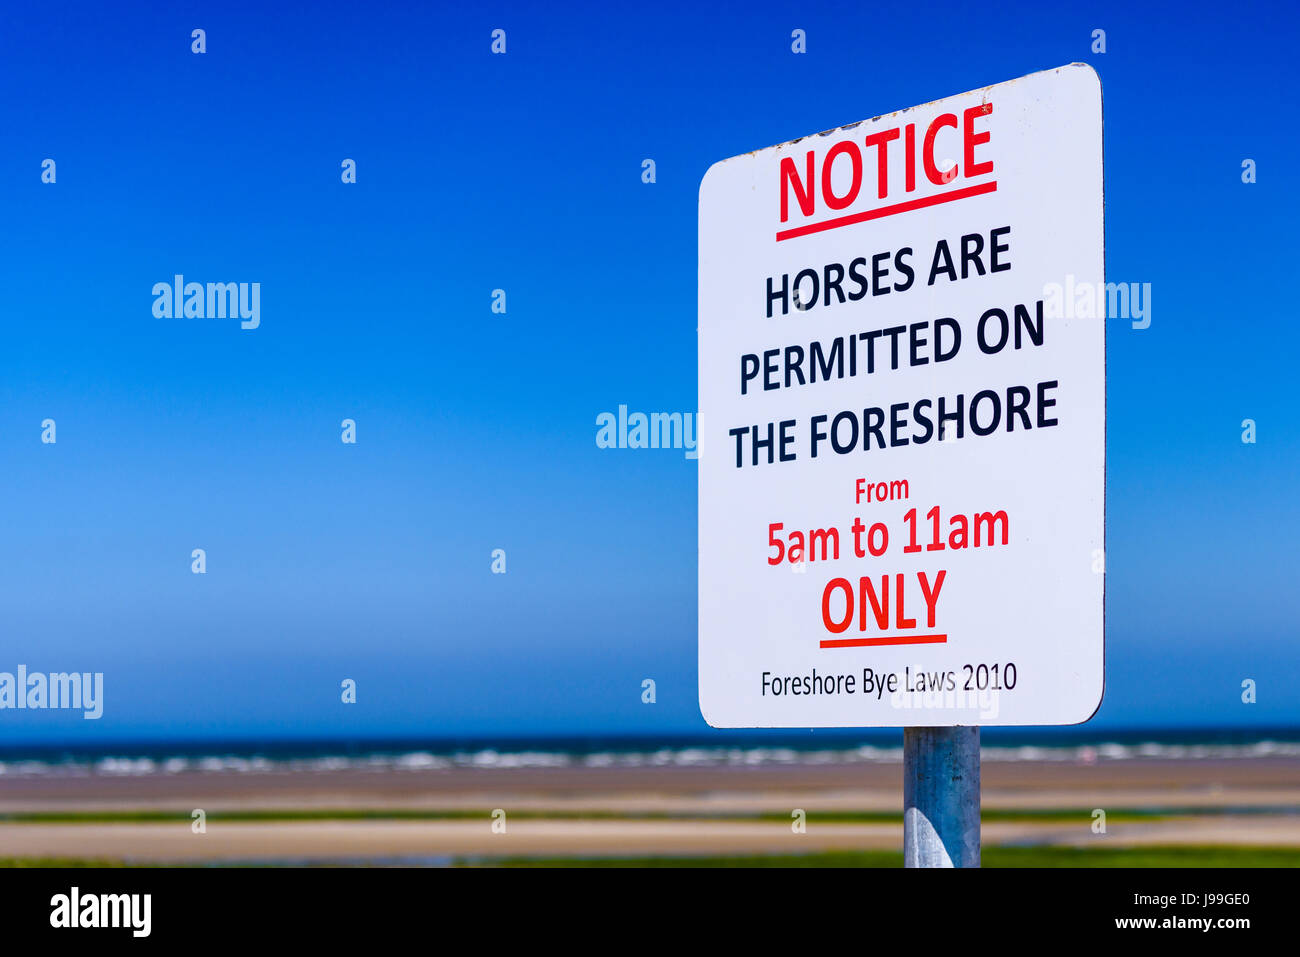 Sign at a beach, advising the public that horses are only permitted on the foreshore between 5am and 11am. Stock Photo